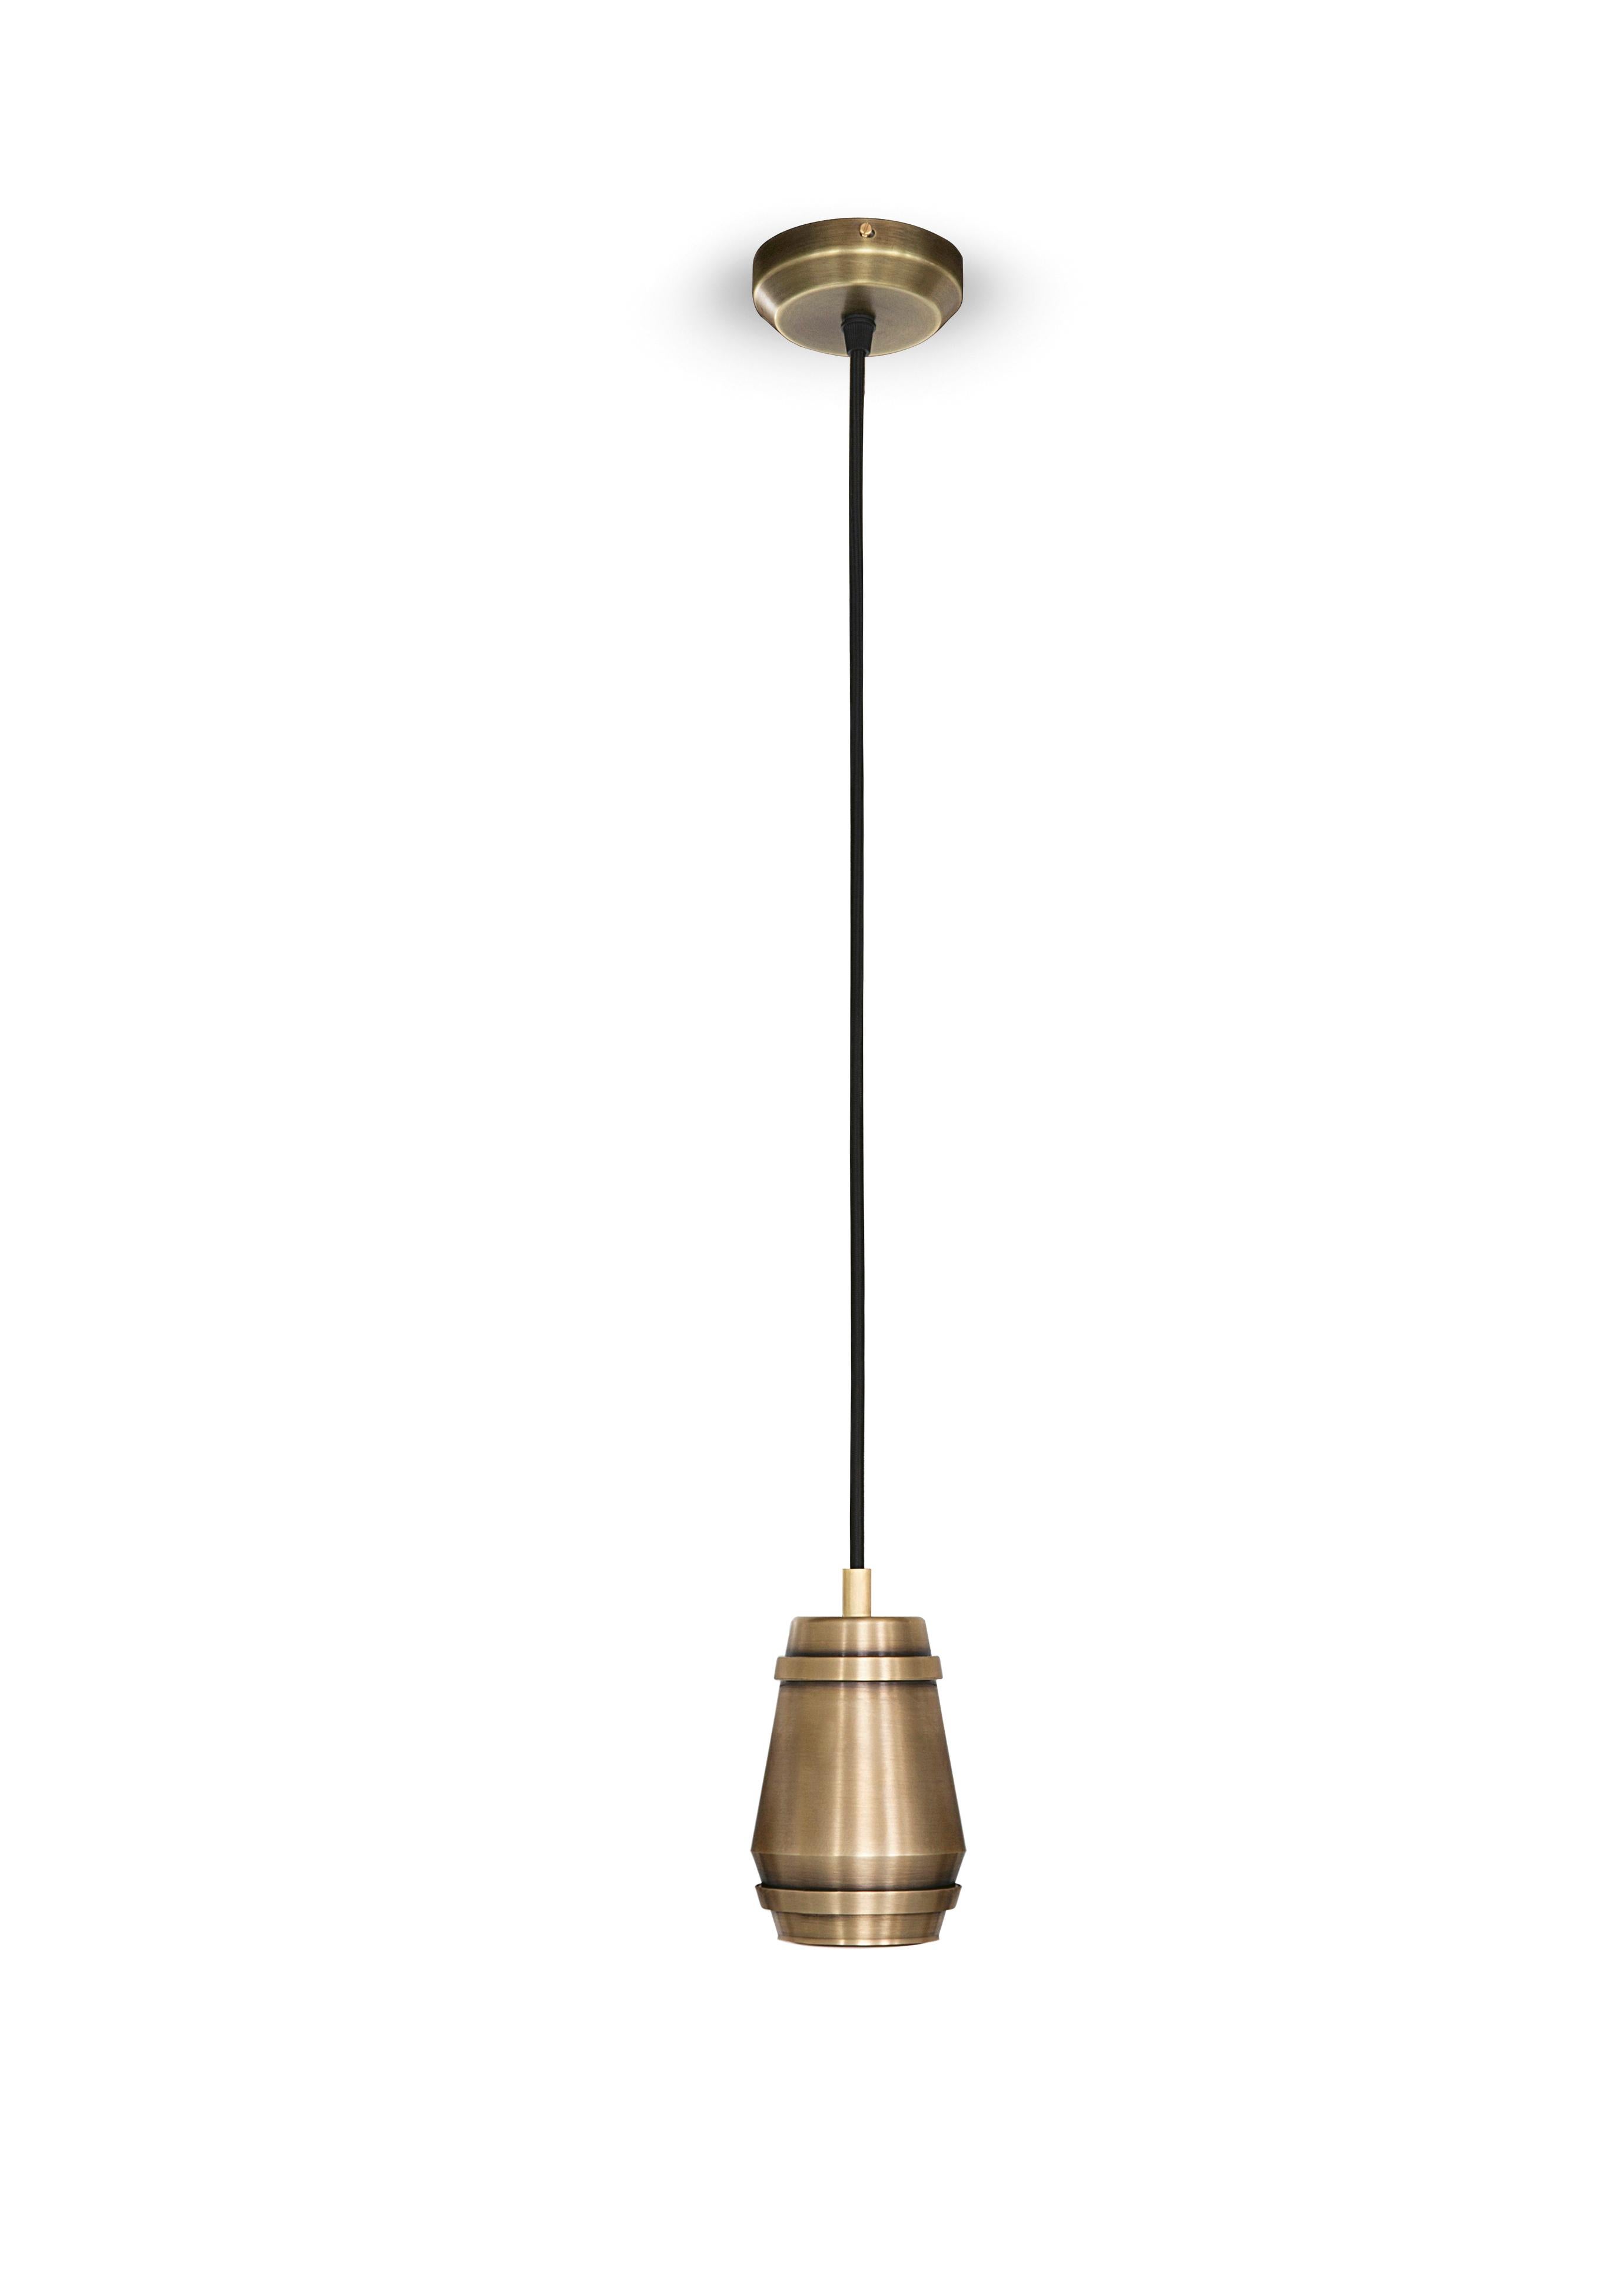 Cask pendant light by Bert Frank
Dimensions: 60-200 x 9 cm
Materials: Brass 

Brushed brass lacquered as standard custom finishes available
All our lamps can be wired according to each country. If sold to the USA it will be wired for the USA for